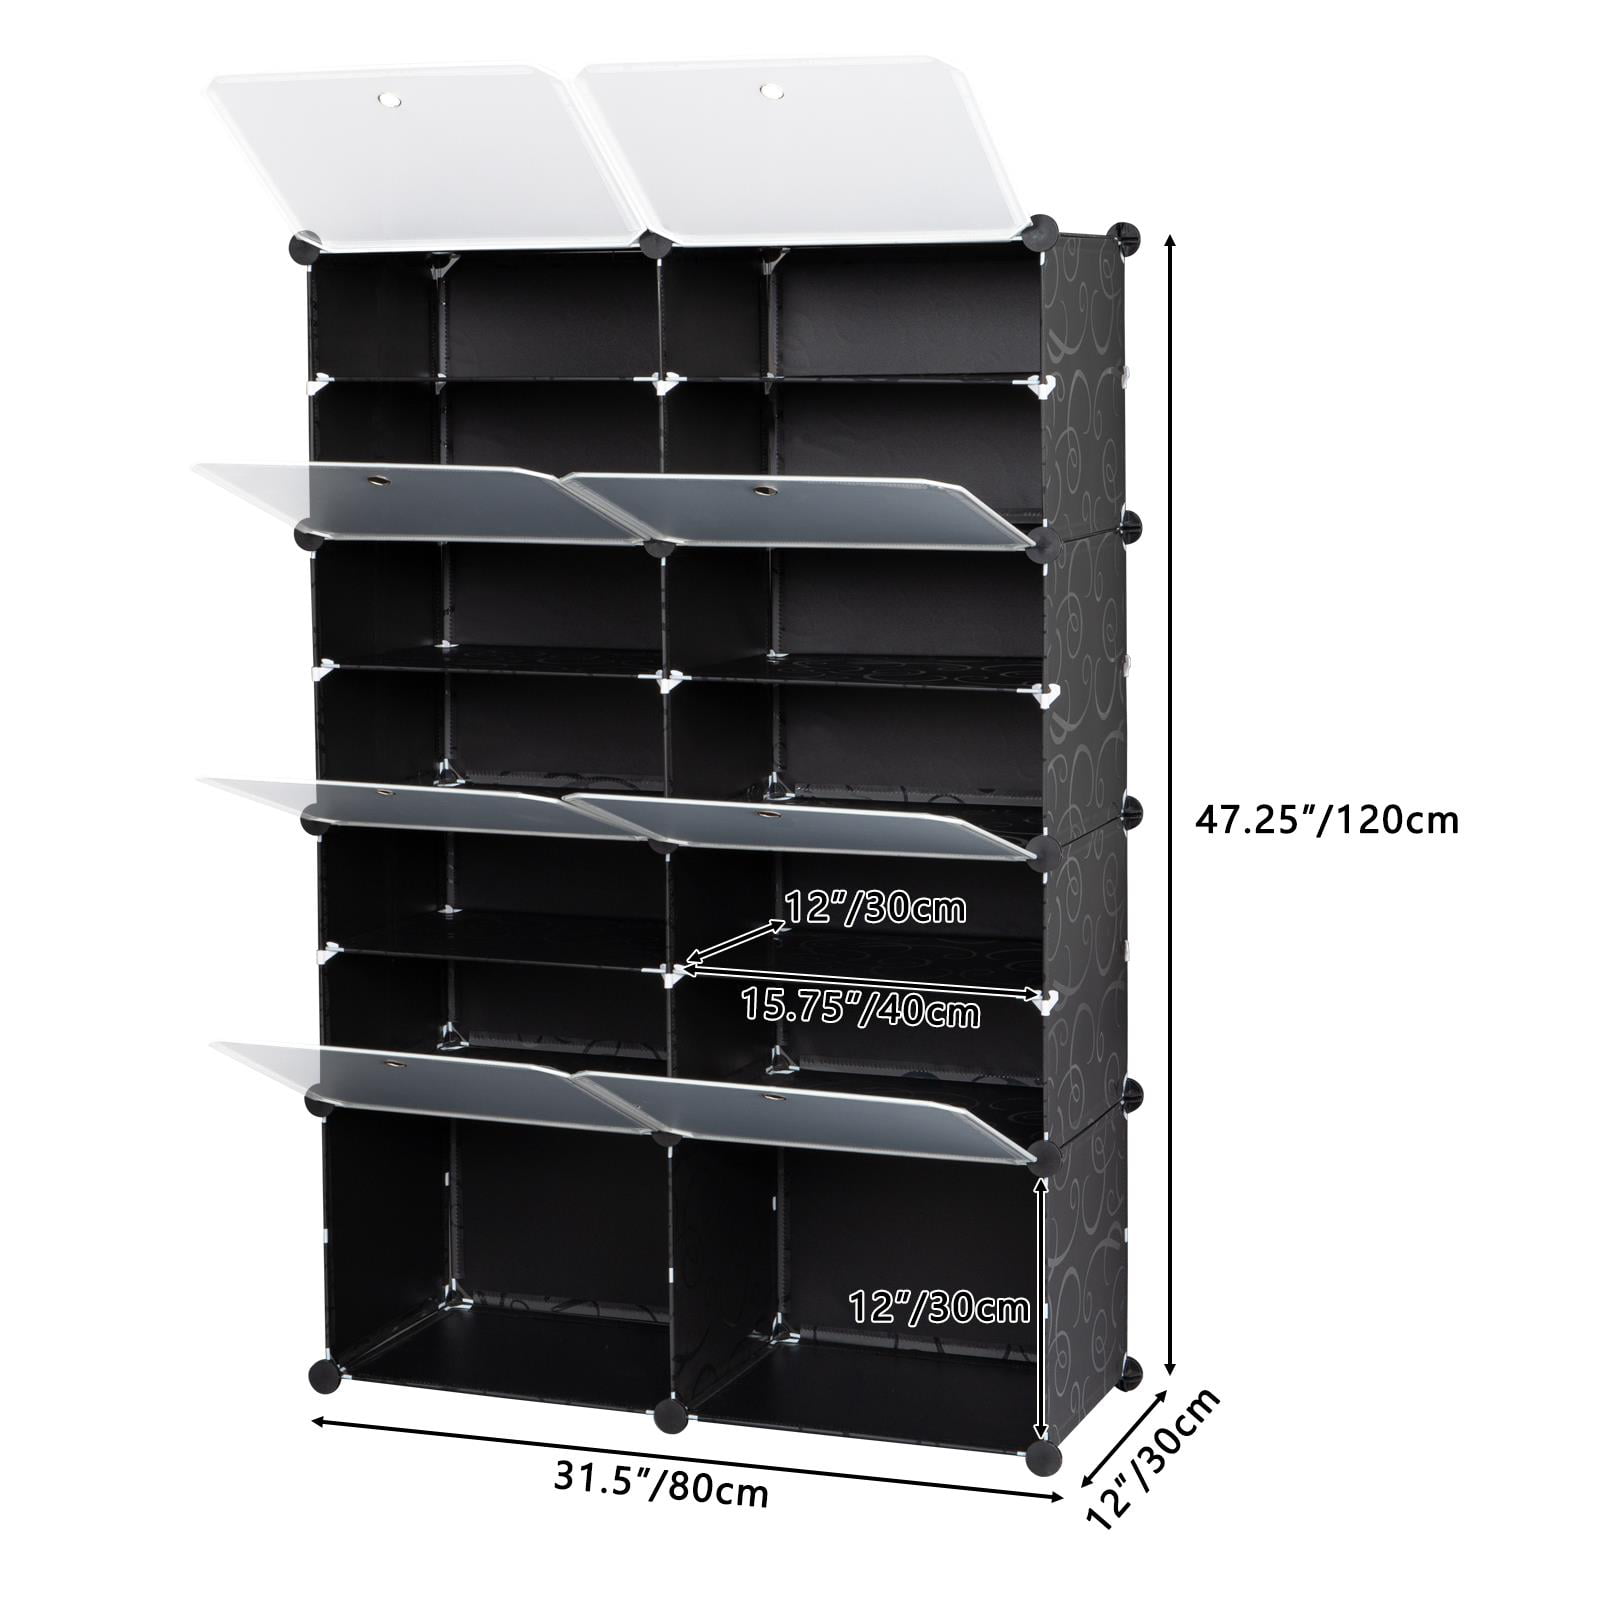 Jucaifu Stackable Small Shoe Rack, Entryway, Hallway and Closet Space  Saving Storage and Organization (3-Tier, Black)